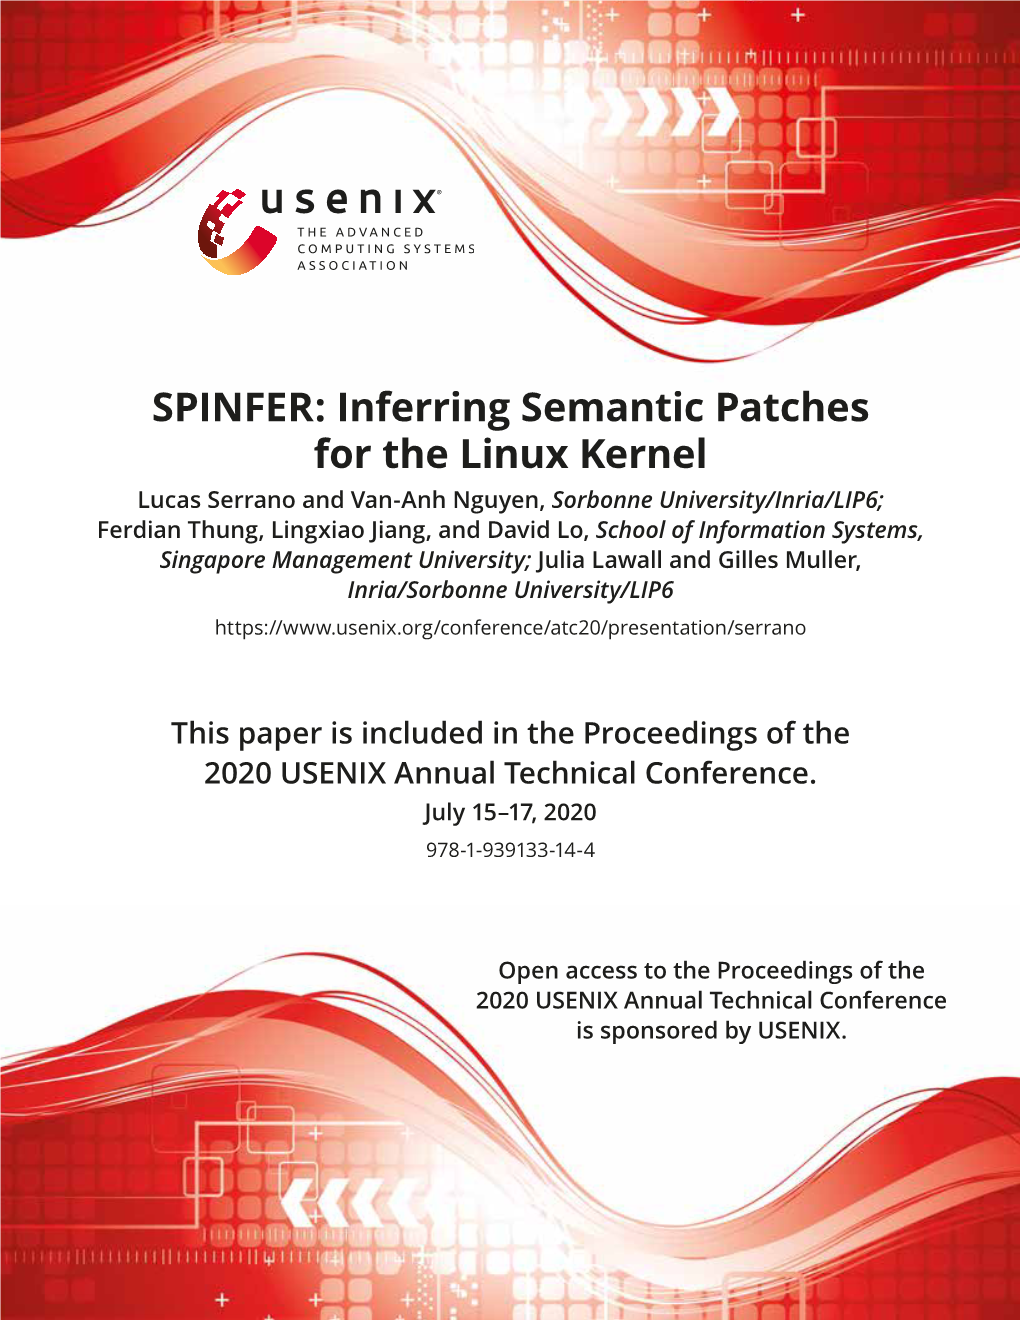 Inferring Semantic Patches for the Linux Kernel